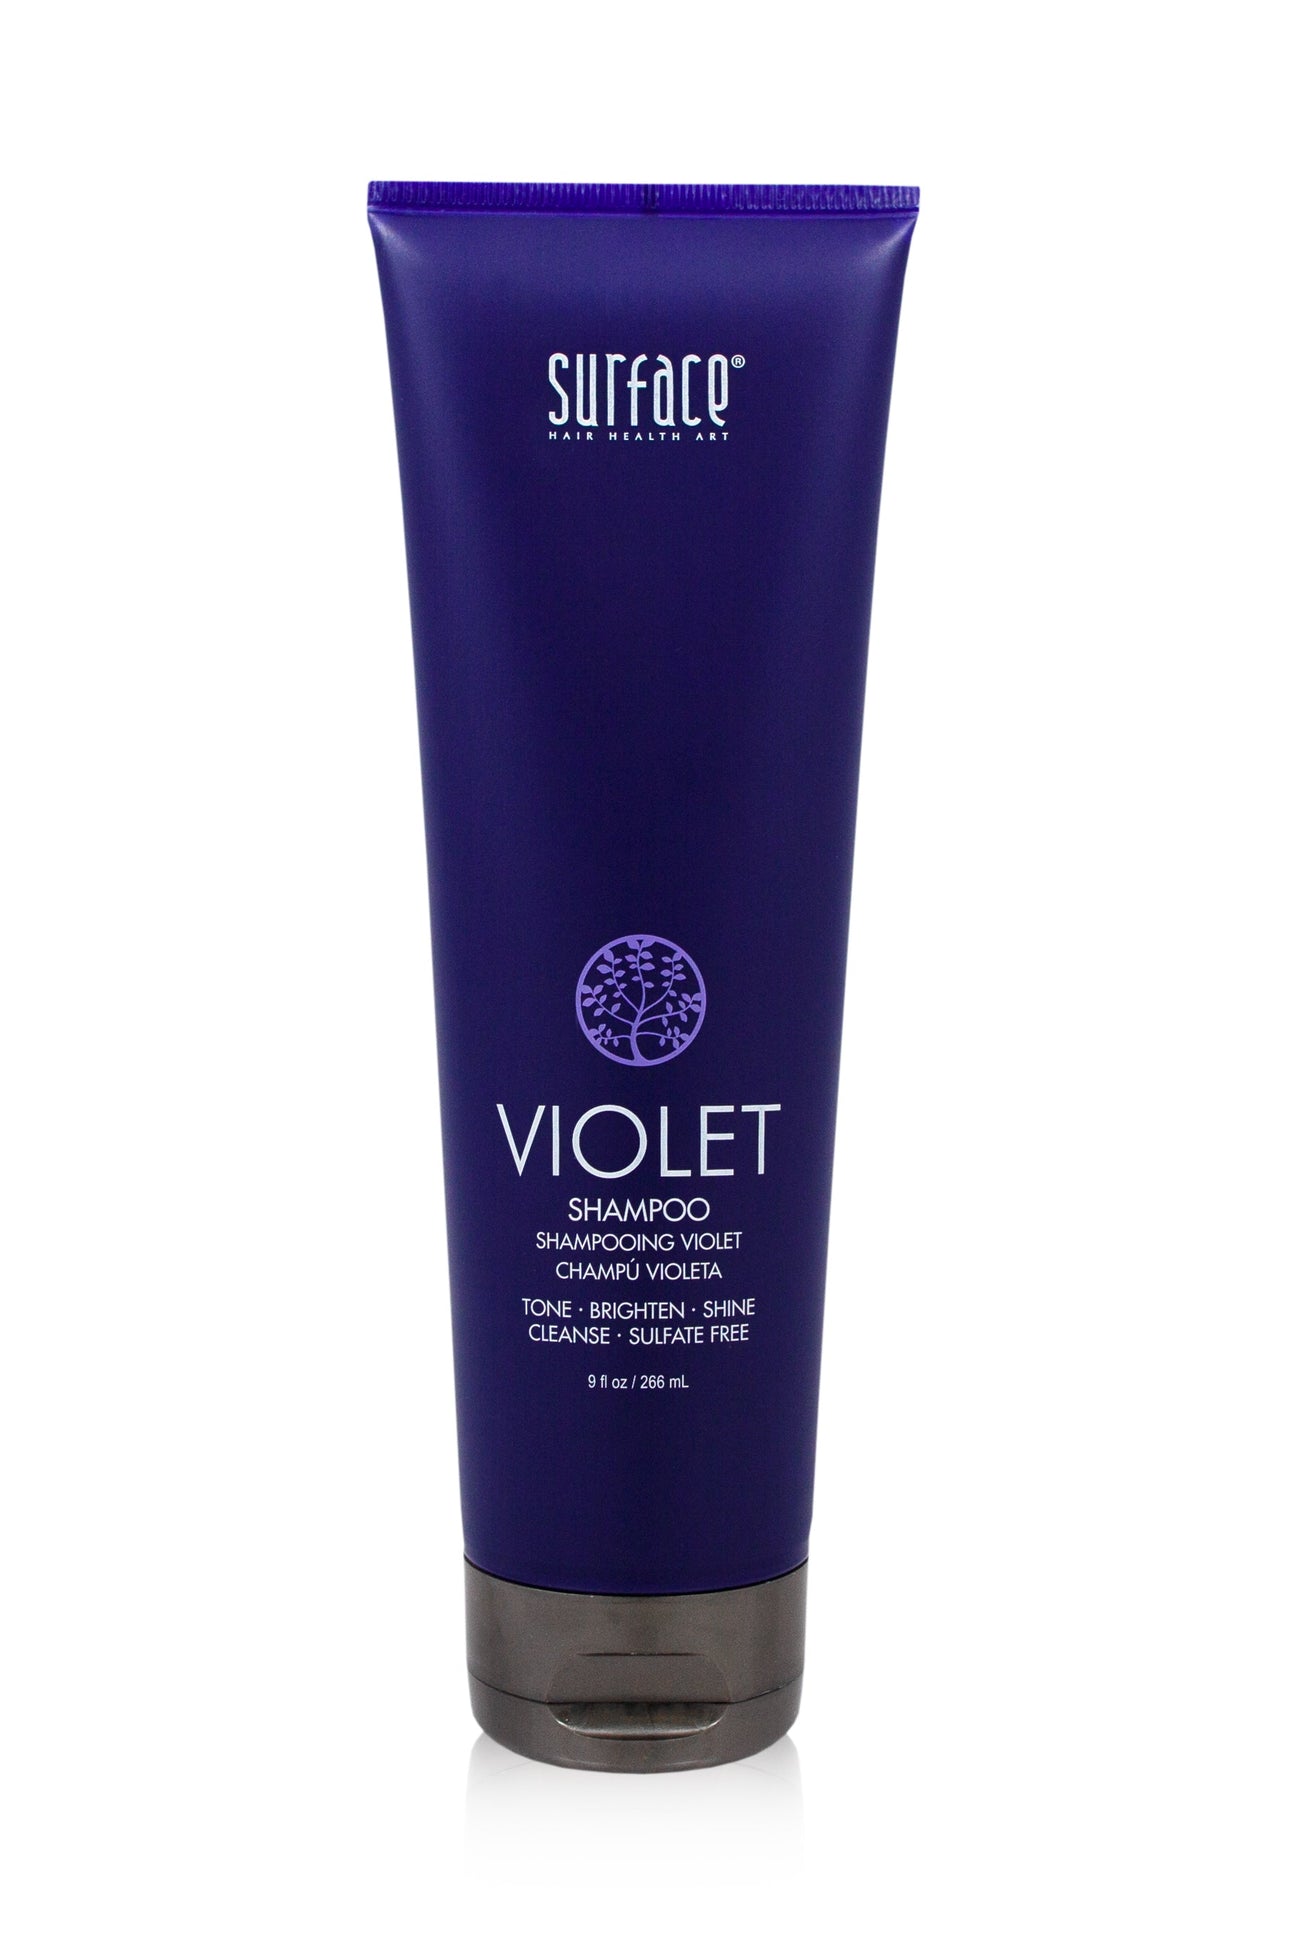 Surface Hair Violet Shampoo 9 oz. at Forever Young 1